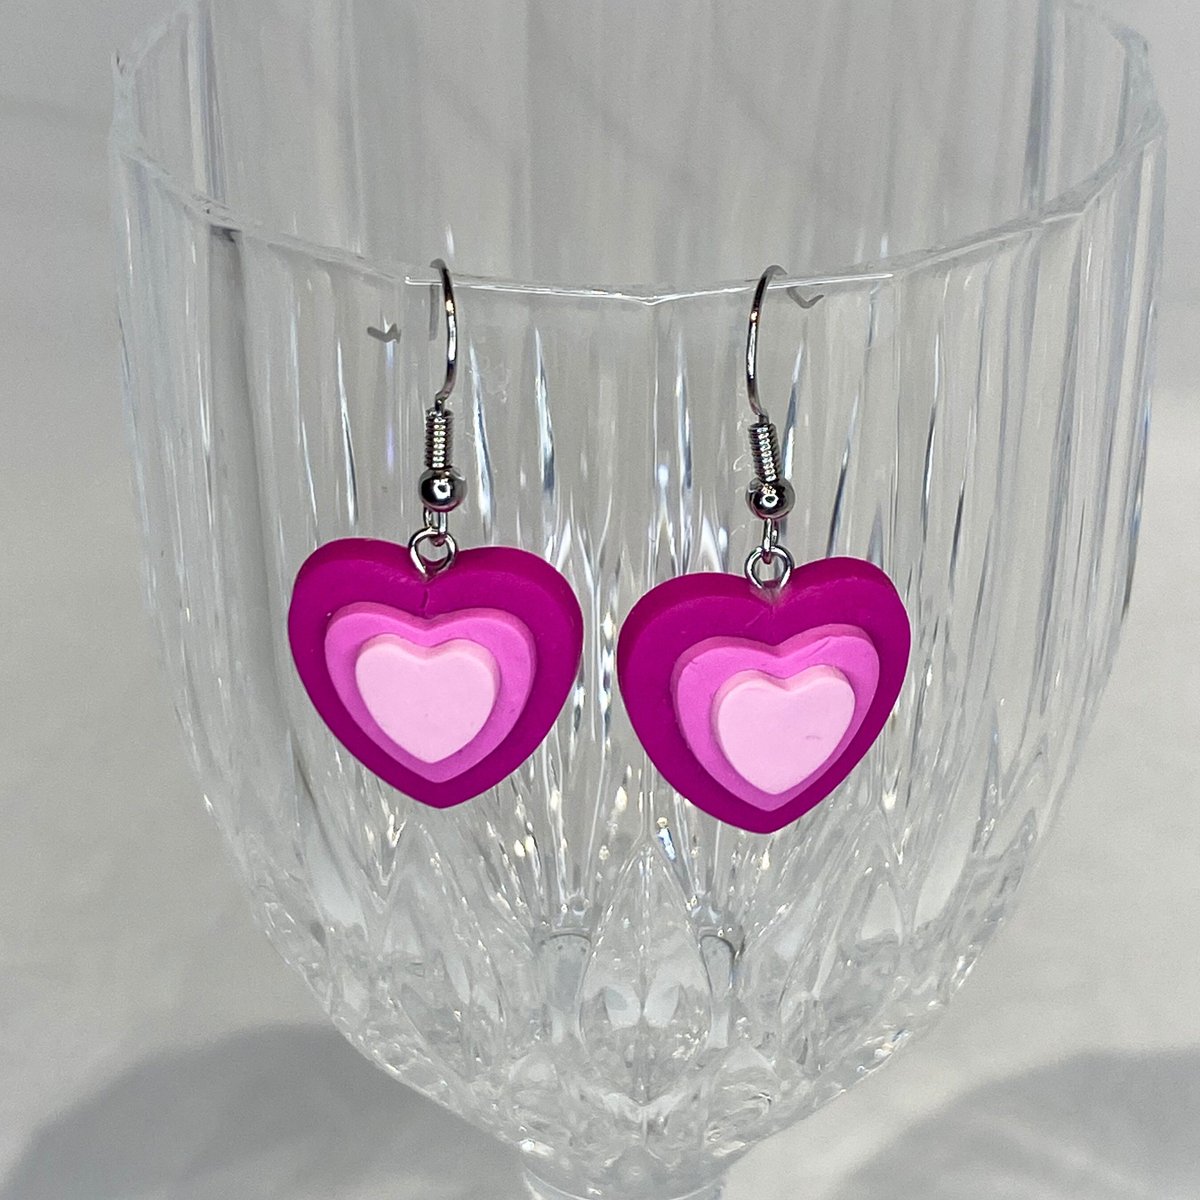 Valentine Pink Heart Earrings Dangle Dimensional Heart Earrings etsy.me/3QL5ygV #valentinesday #heartearrings #love #earrings #etsyhandmade #Valentine #ValentineJewelry #HeartJewelry